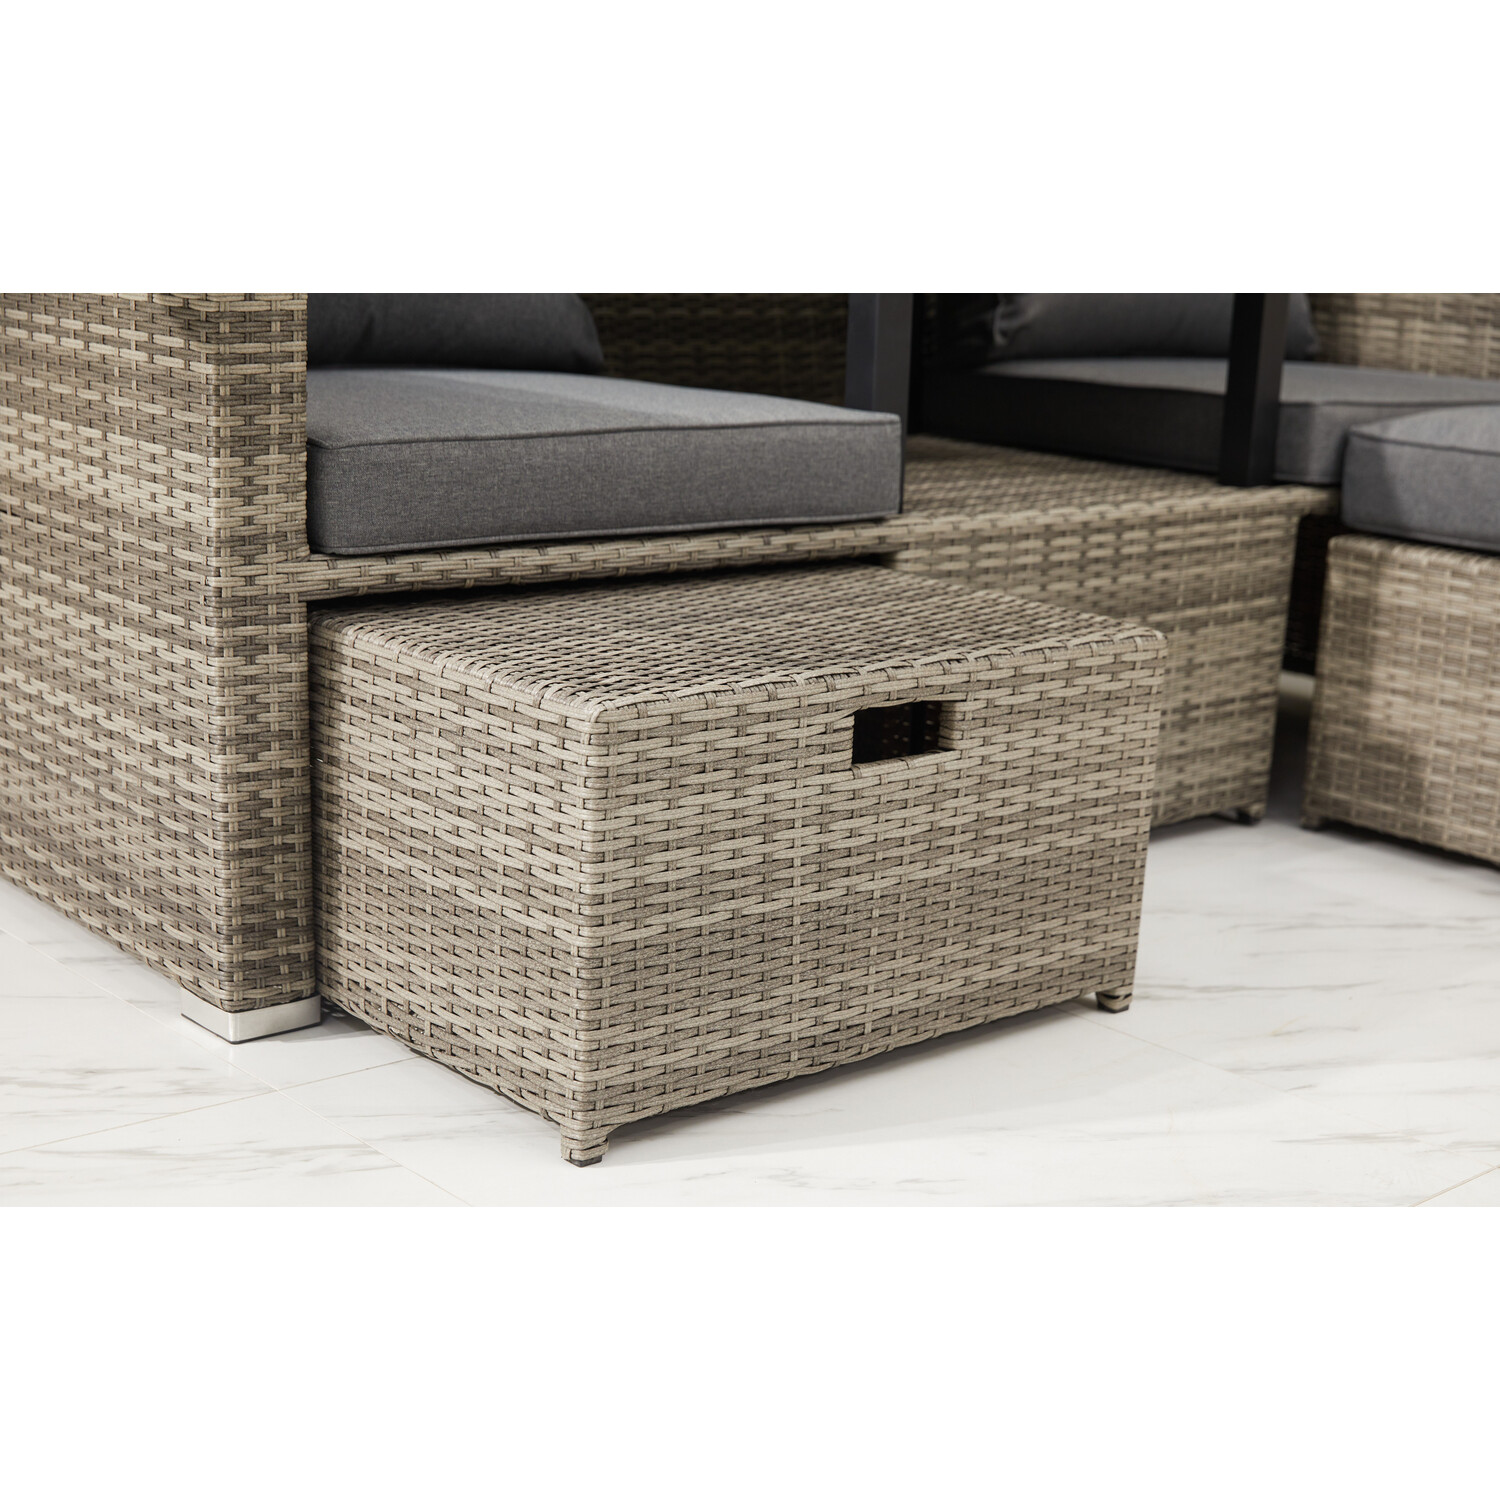 Malay Deluxe Malay New Hampshire 2 Seater Natural Transformer Patio Set Image 6